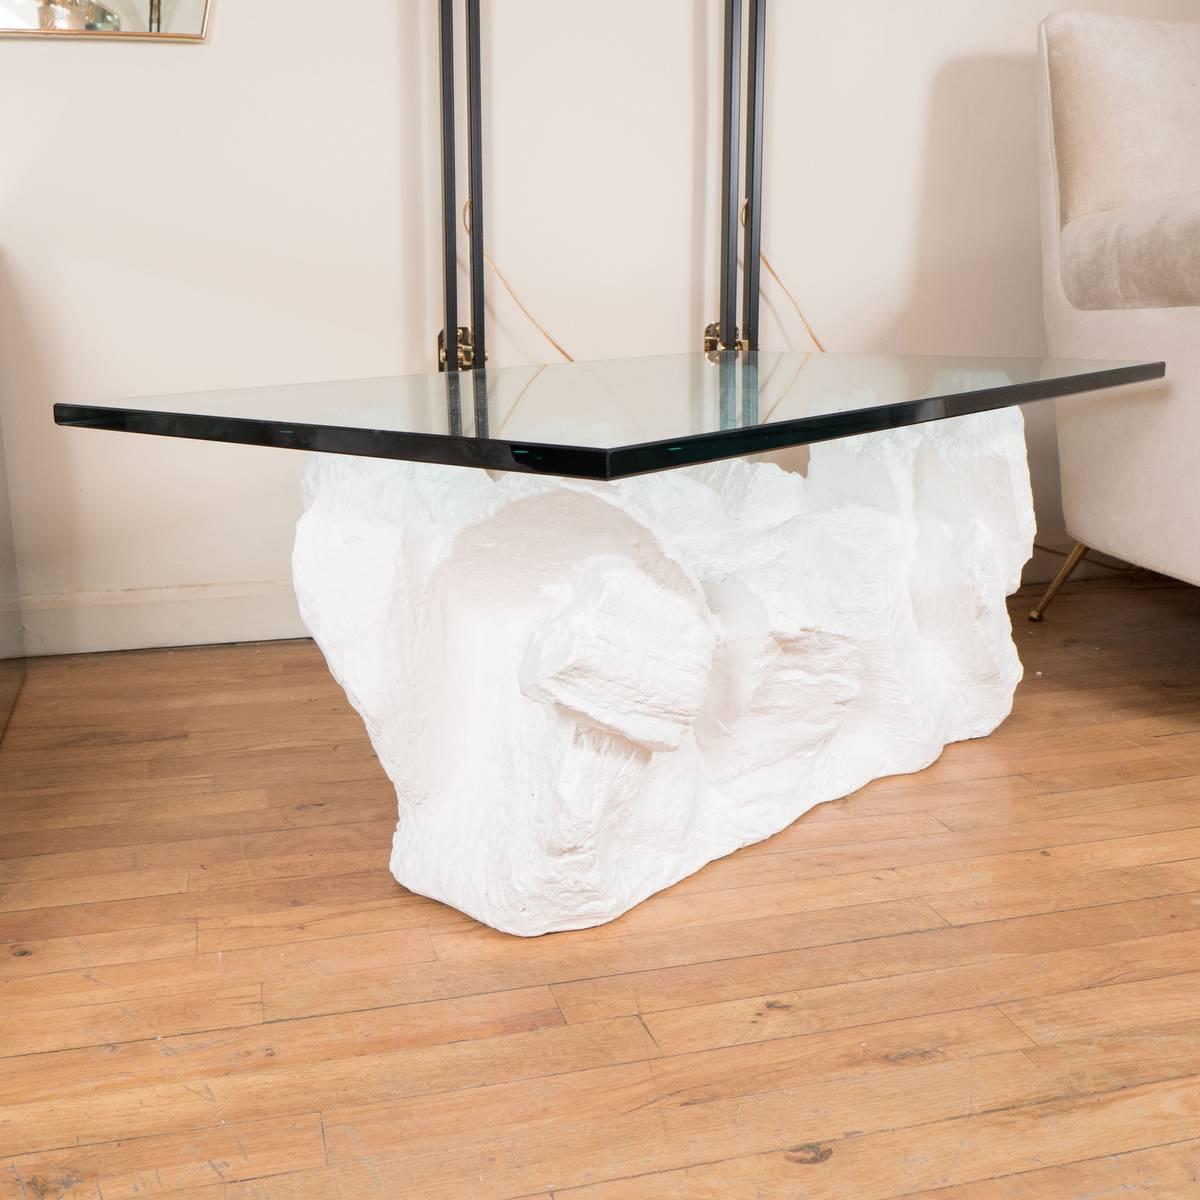 Composition rock form coffee table with rectangular glass top.